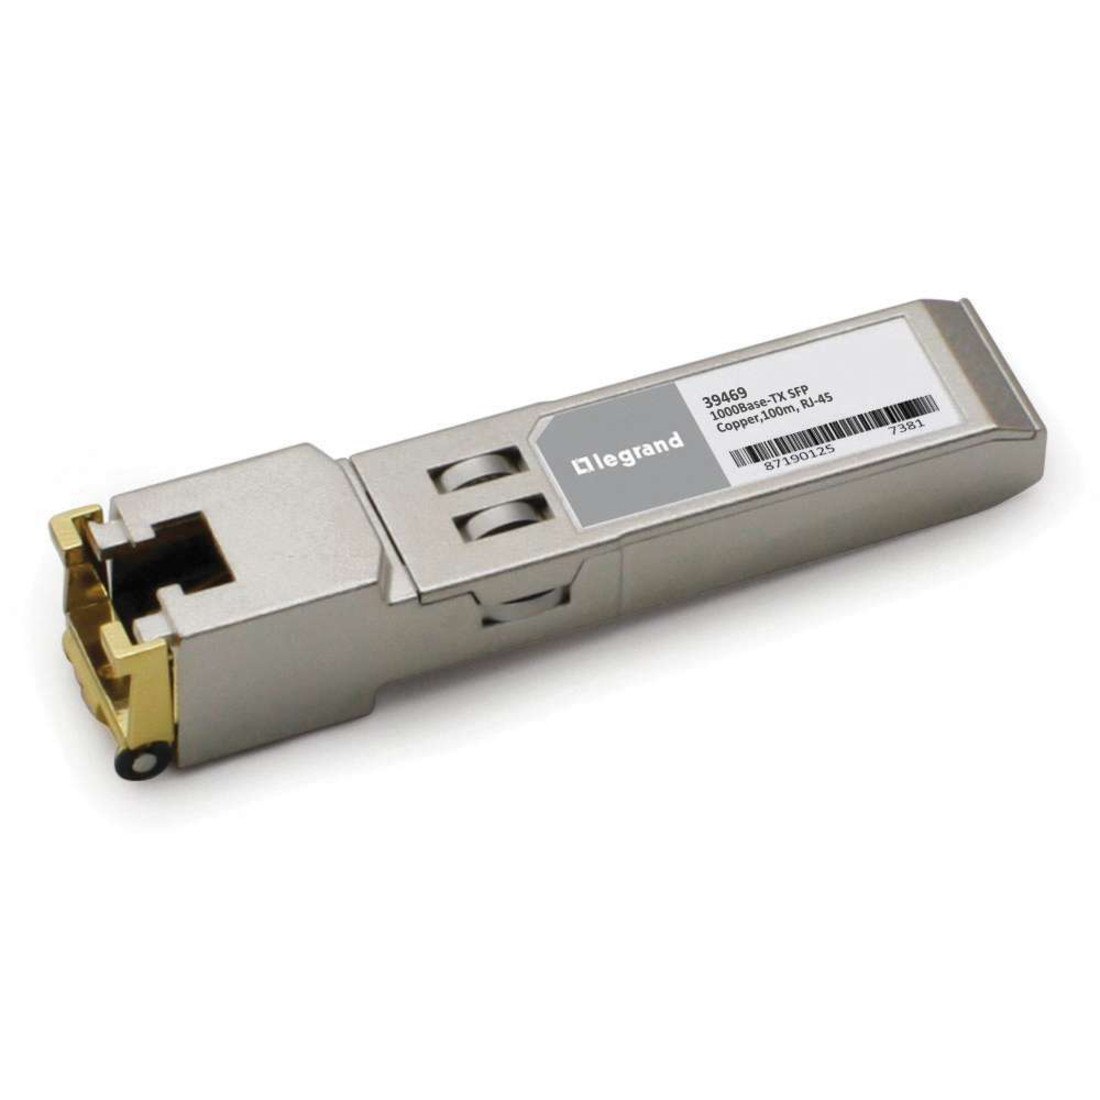 C2G Arista Networks SFP-1G-T Compatible 1000Base-TX Copper SFP (mini-GBIC) Transceiver ModuleFor Data Networking1000Base-TXTwisted PairGi… 39469